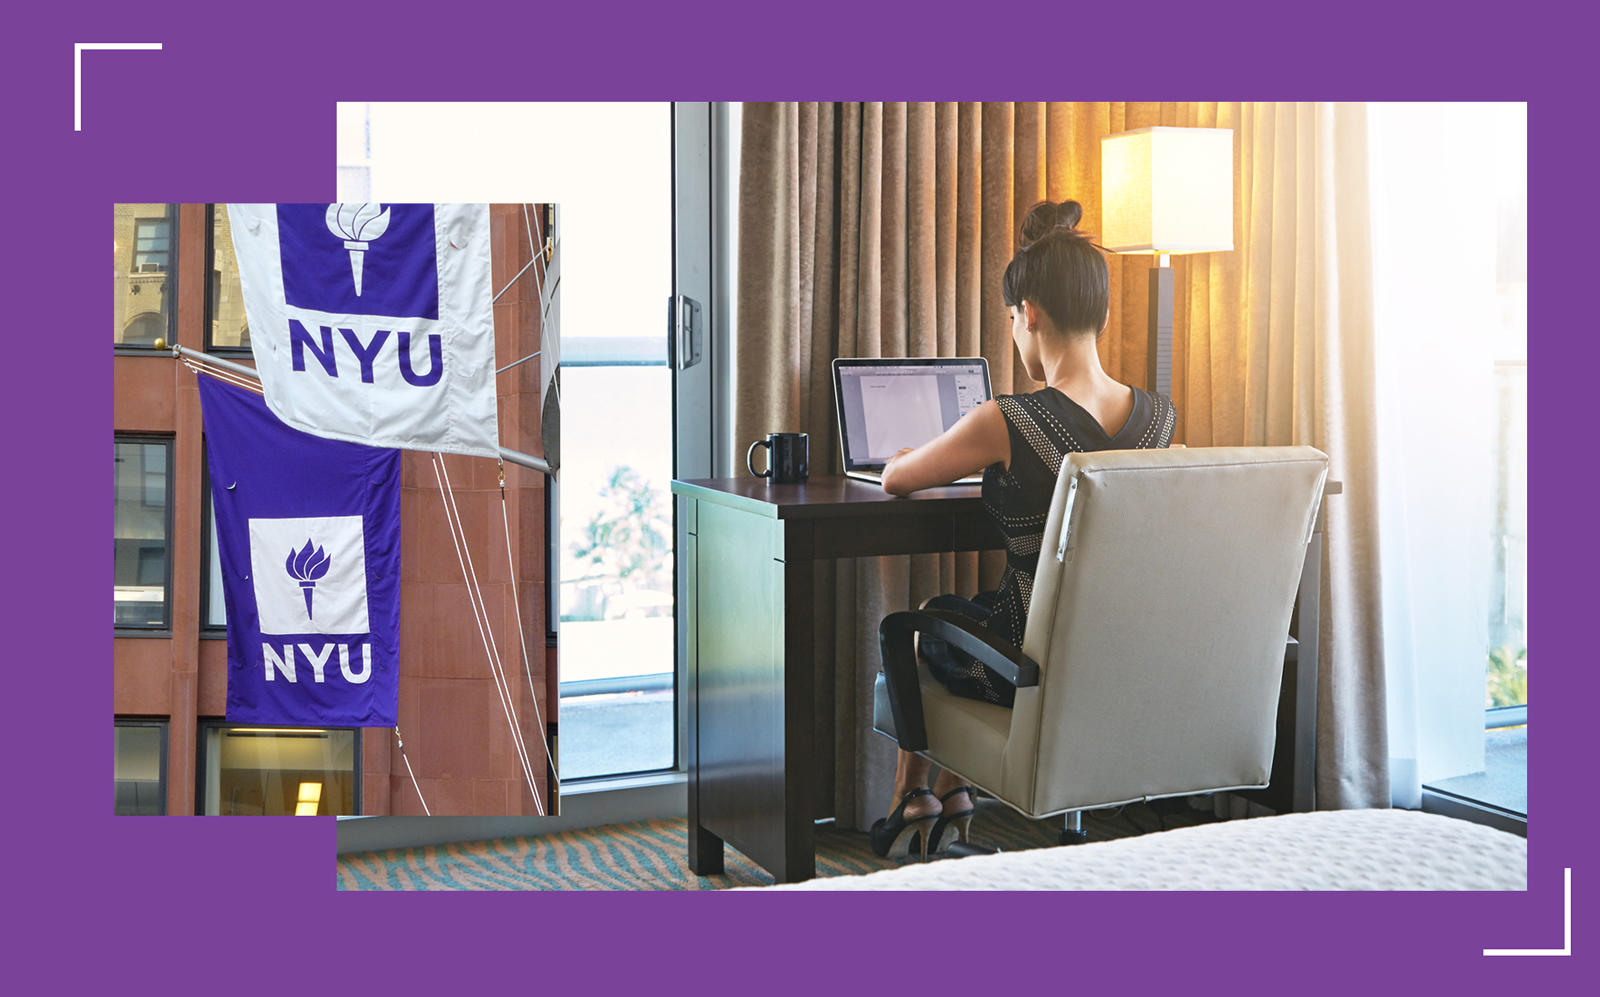 New York University may lease thousands of hotel rooms near its Greenwich Village campus to maintain social distance between students. (iStock, Wikipedia Commons)